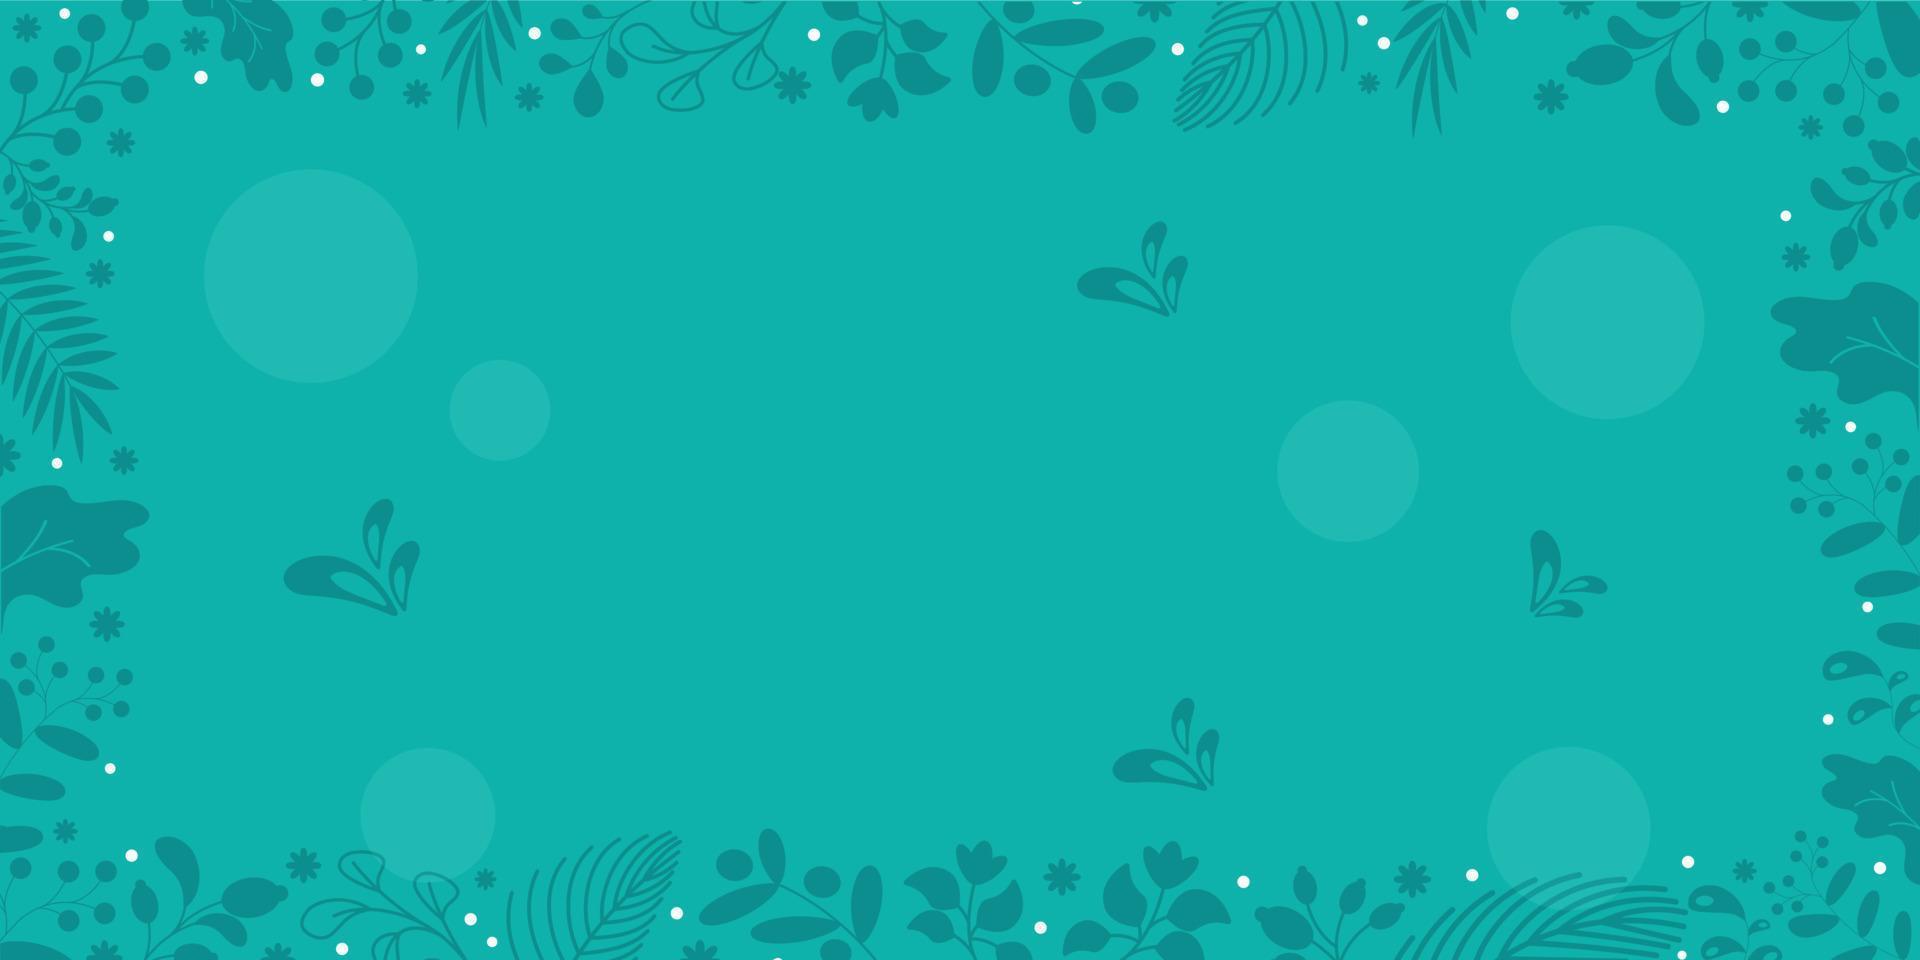 Christmas  Floral Background vector